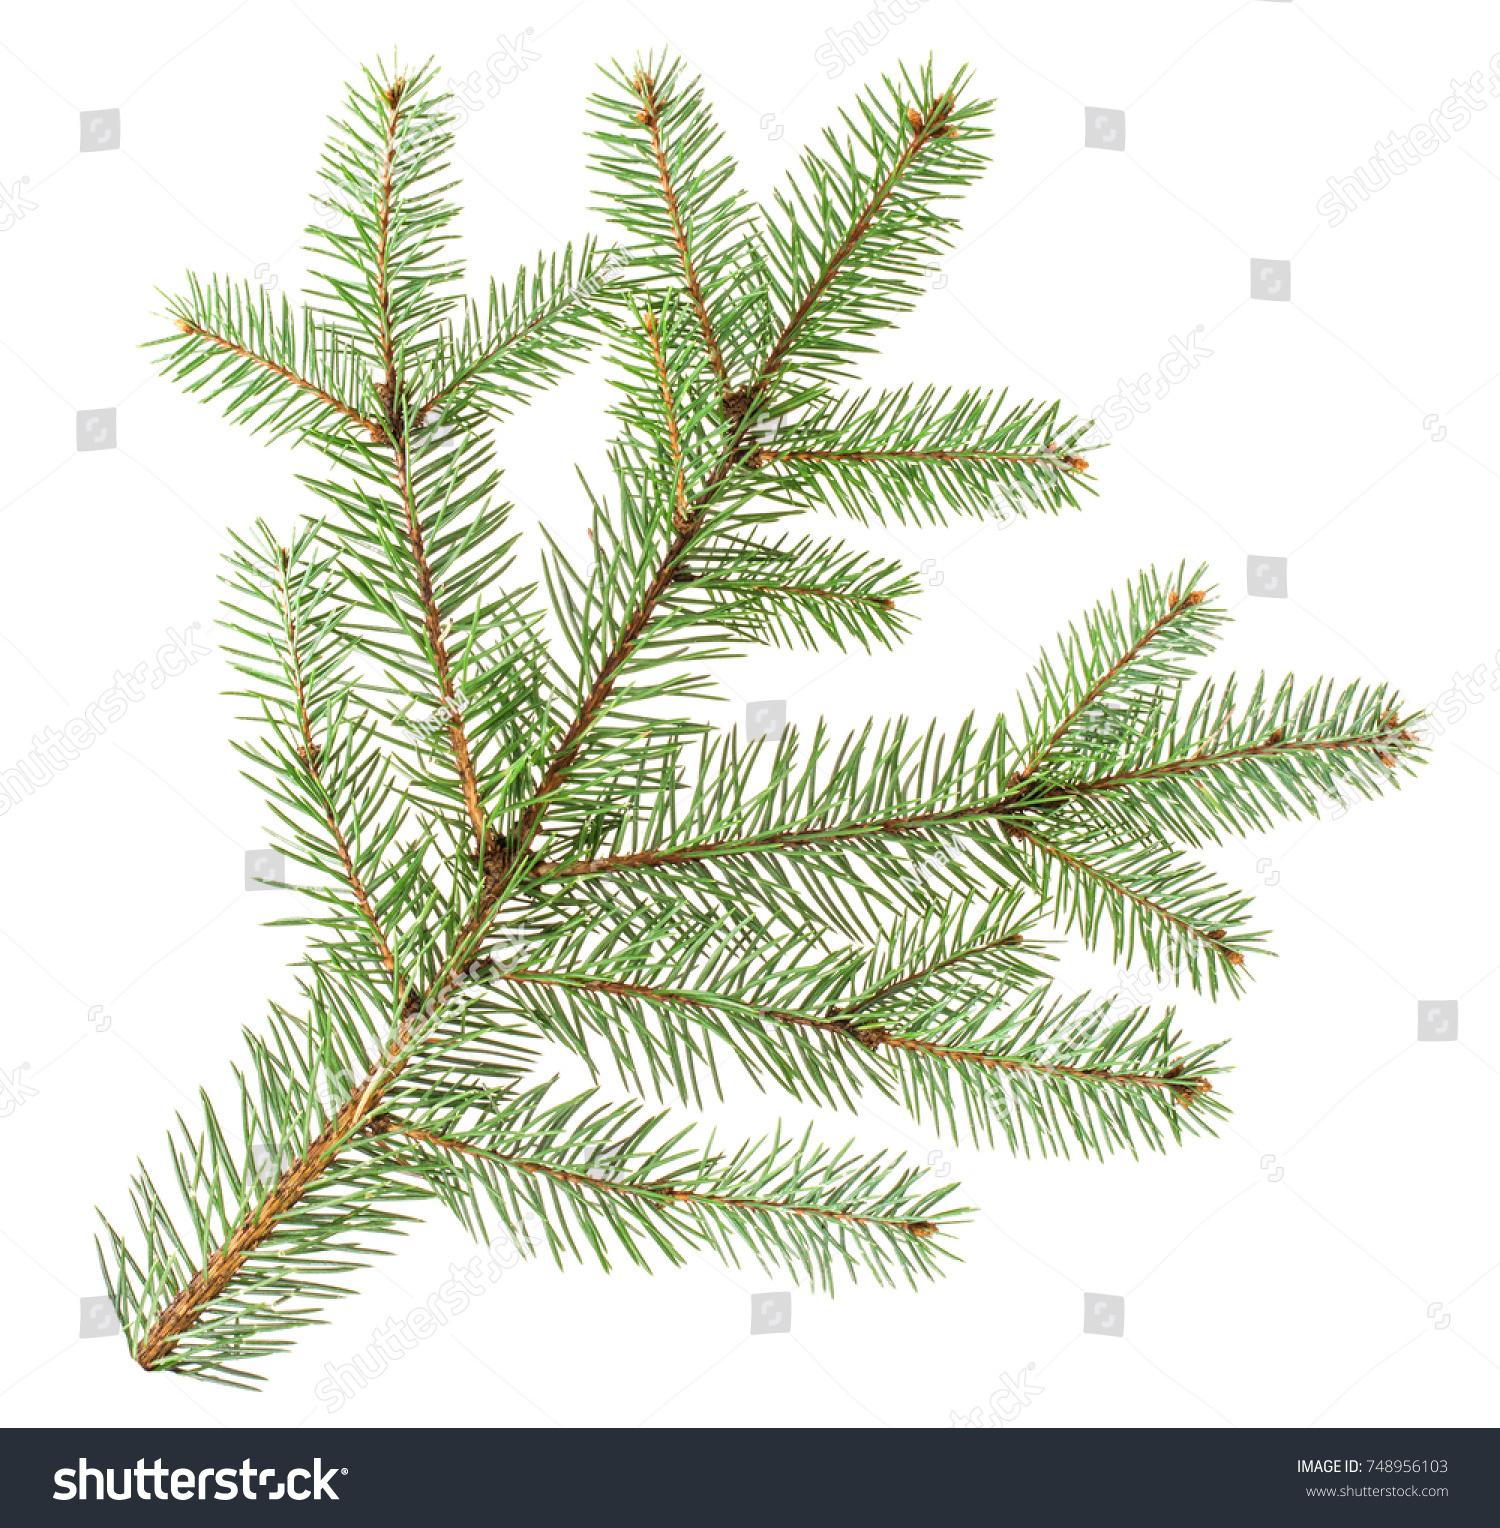 Fir Branch Isolated On White Background Stock Photo (Royalty Free ...